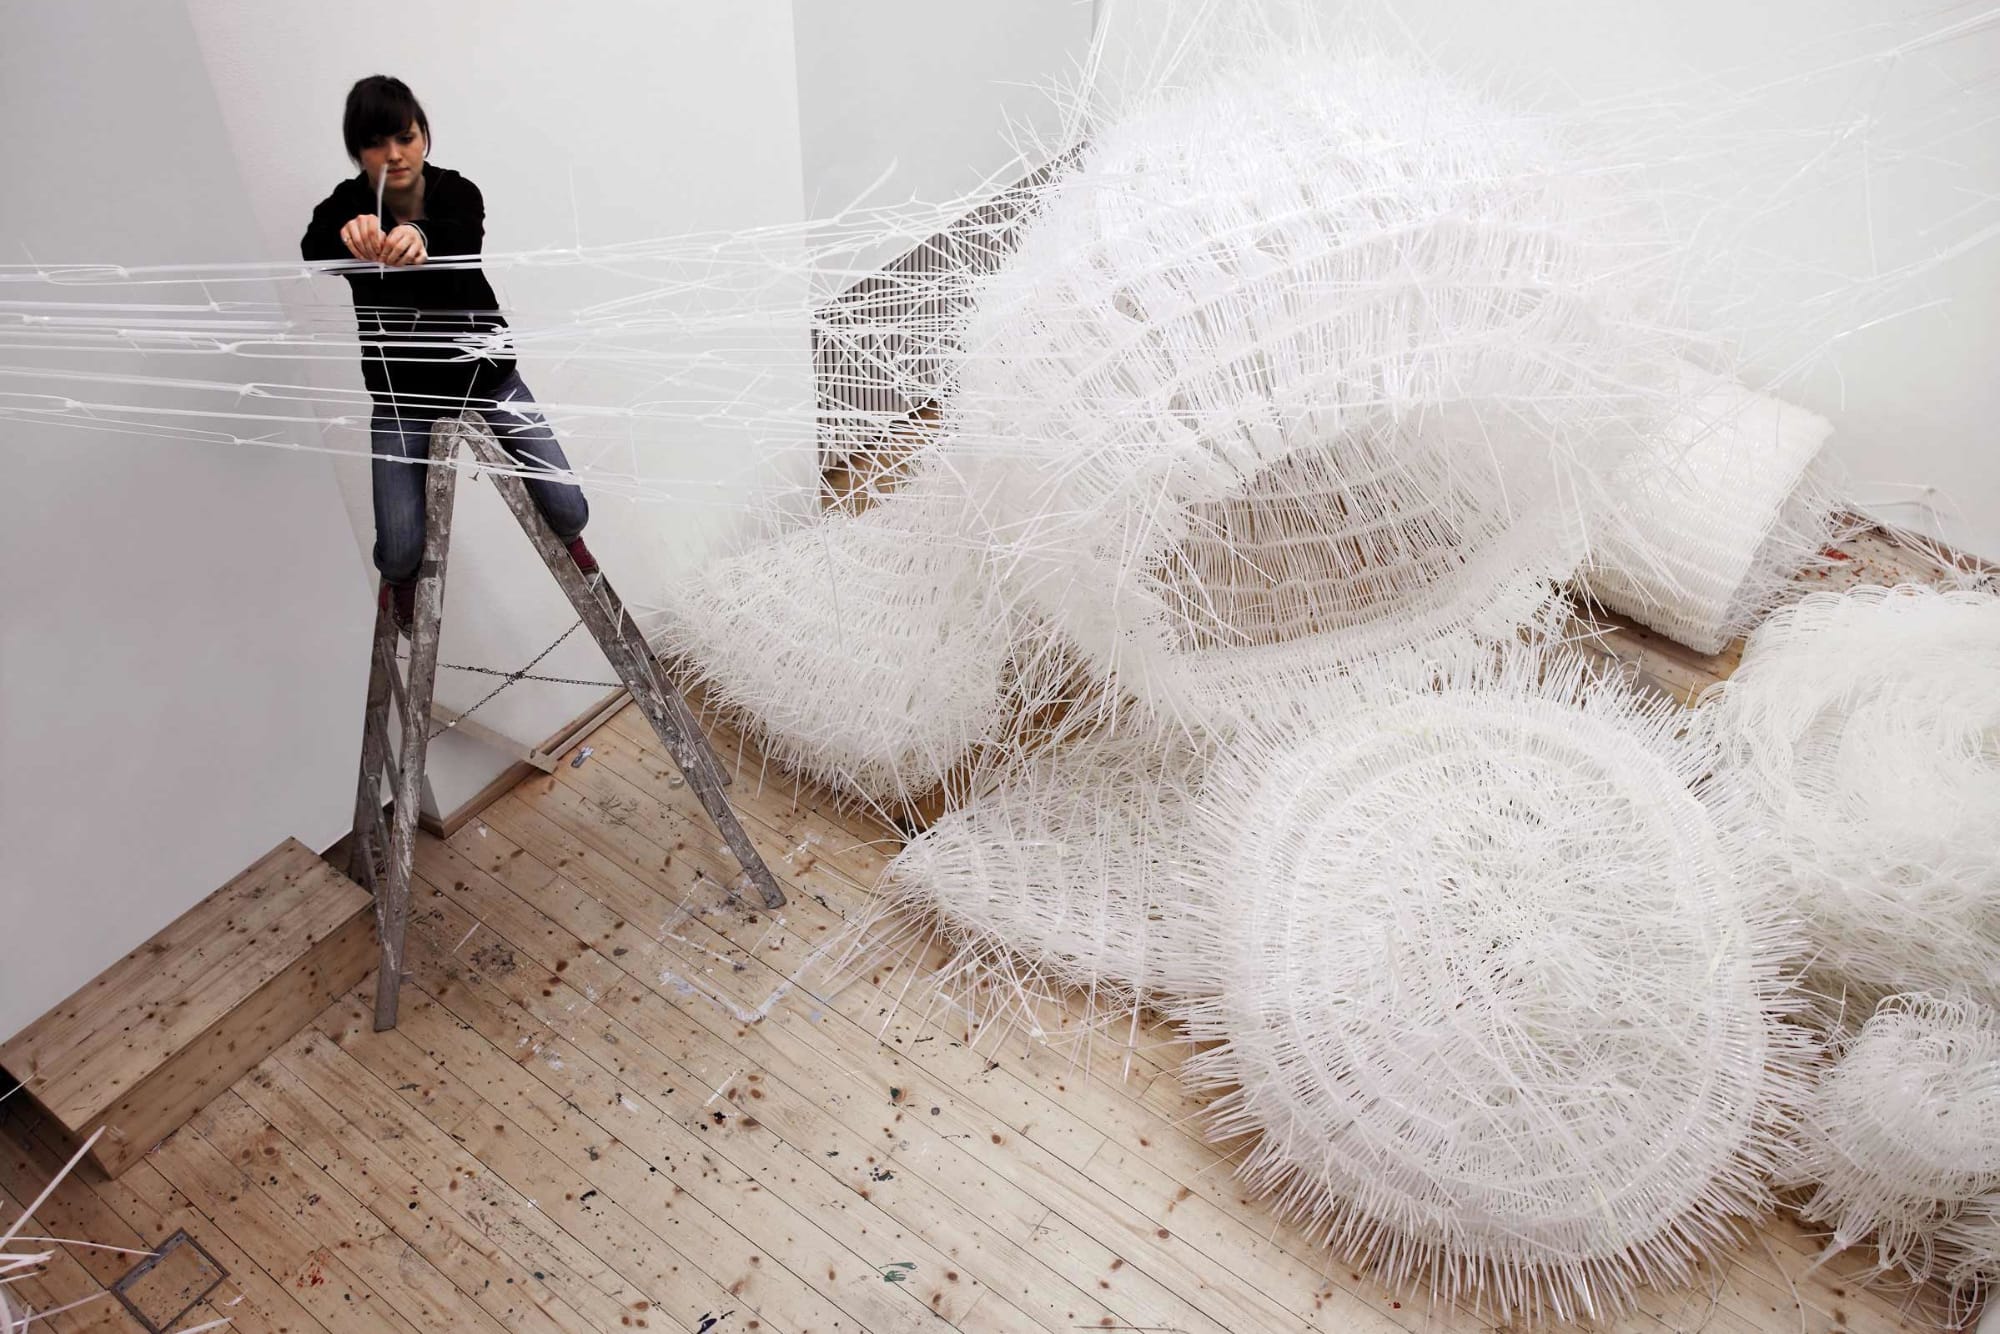 Third Space spatial installation of white woven cable ties with wild spiky structure creates caves, columns and nets. Person on a ladder securing cable ties.